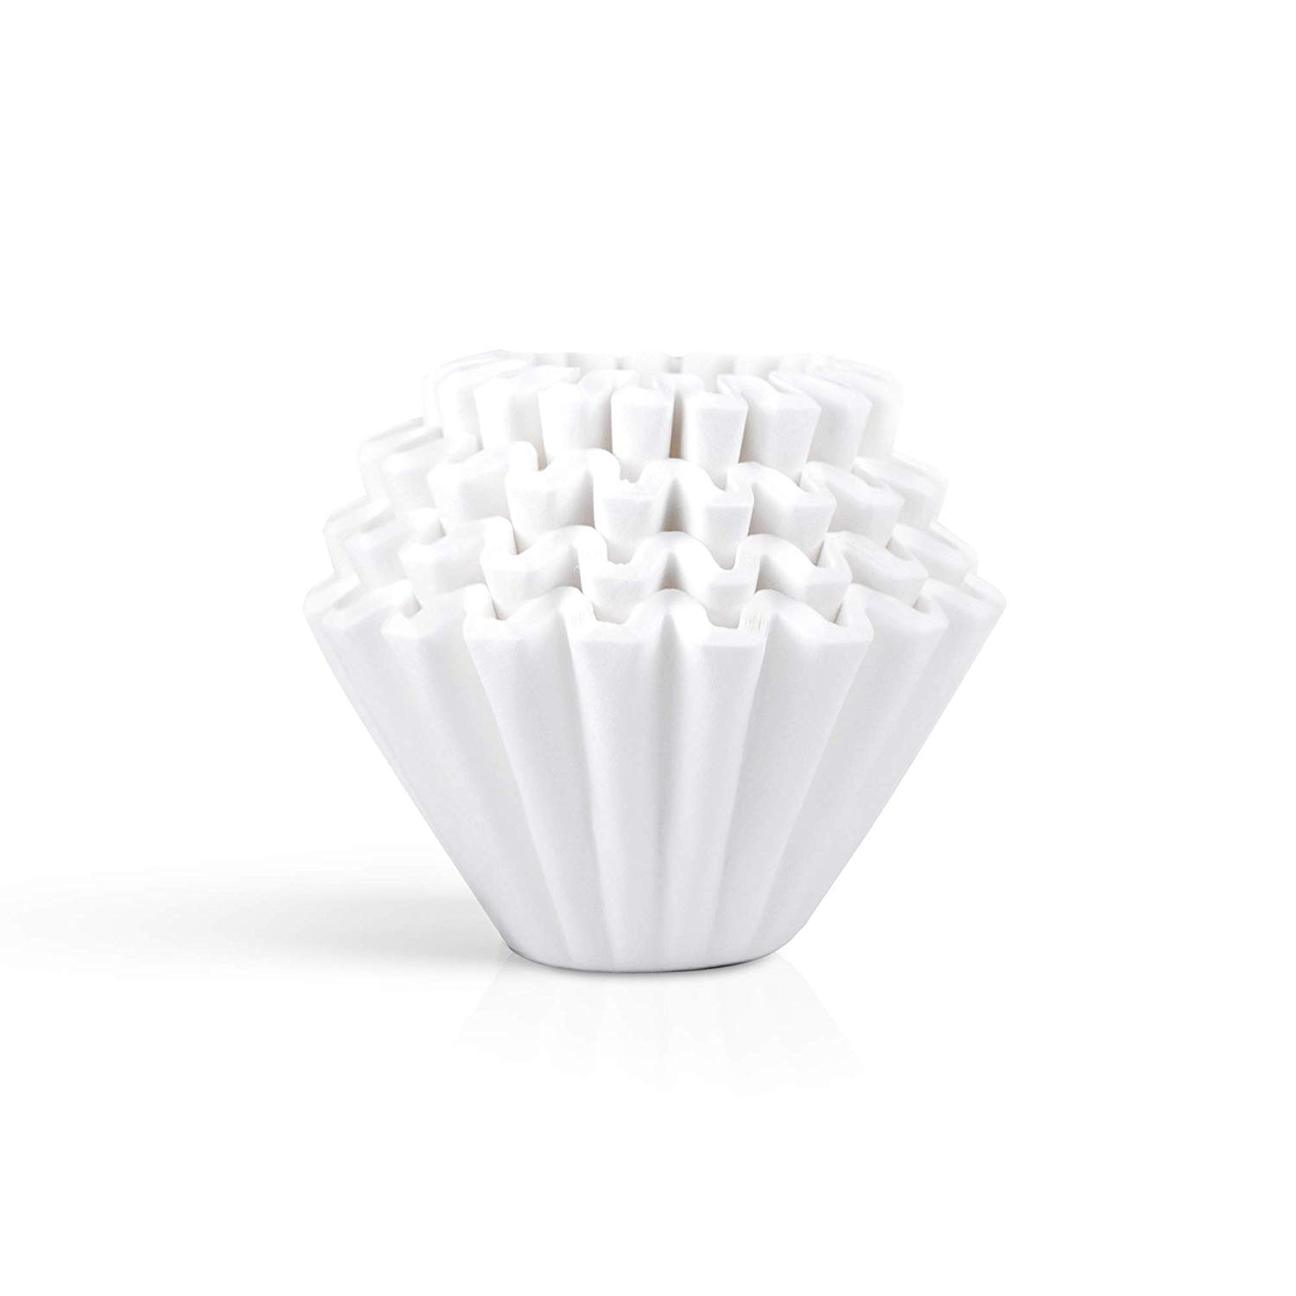 Pack of 100 filter papers for Kalita wave (size 185)